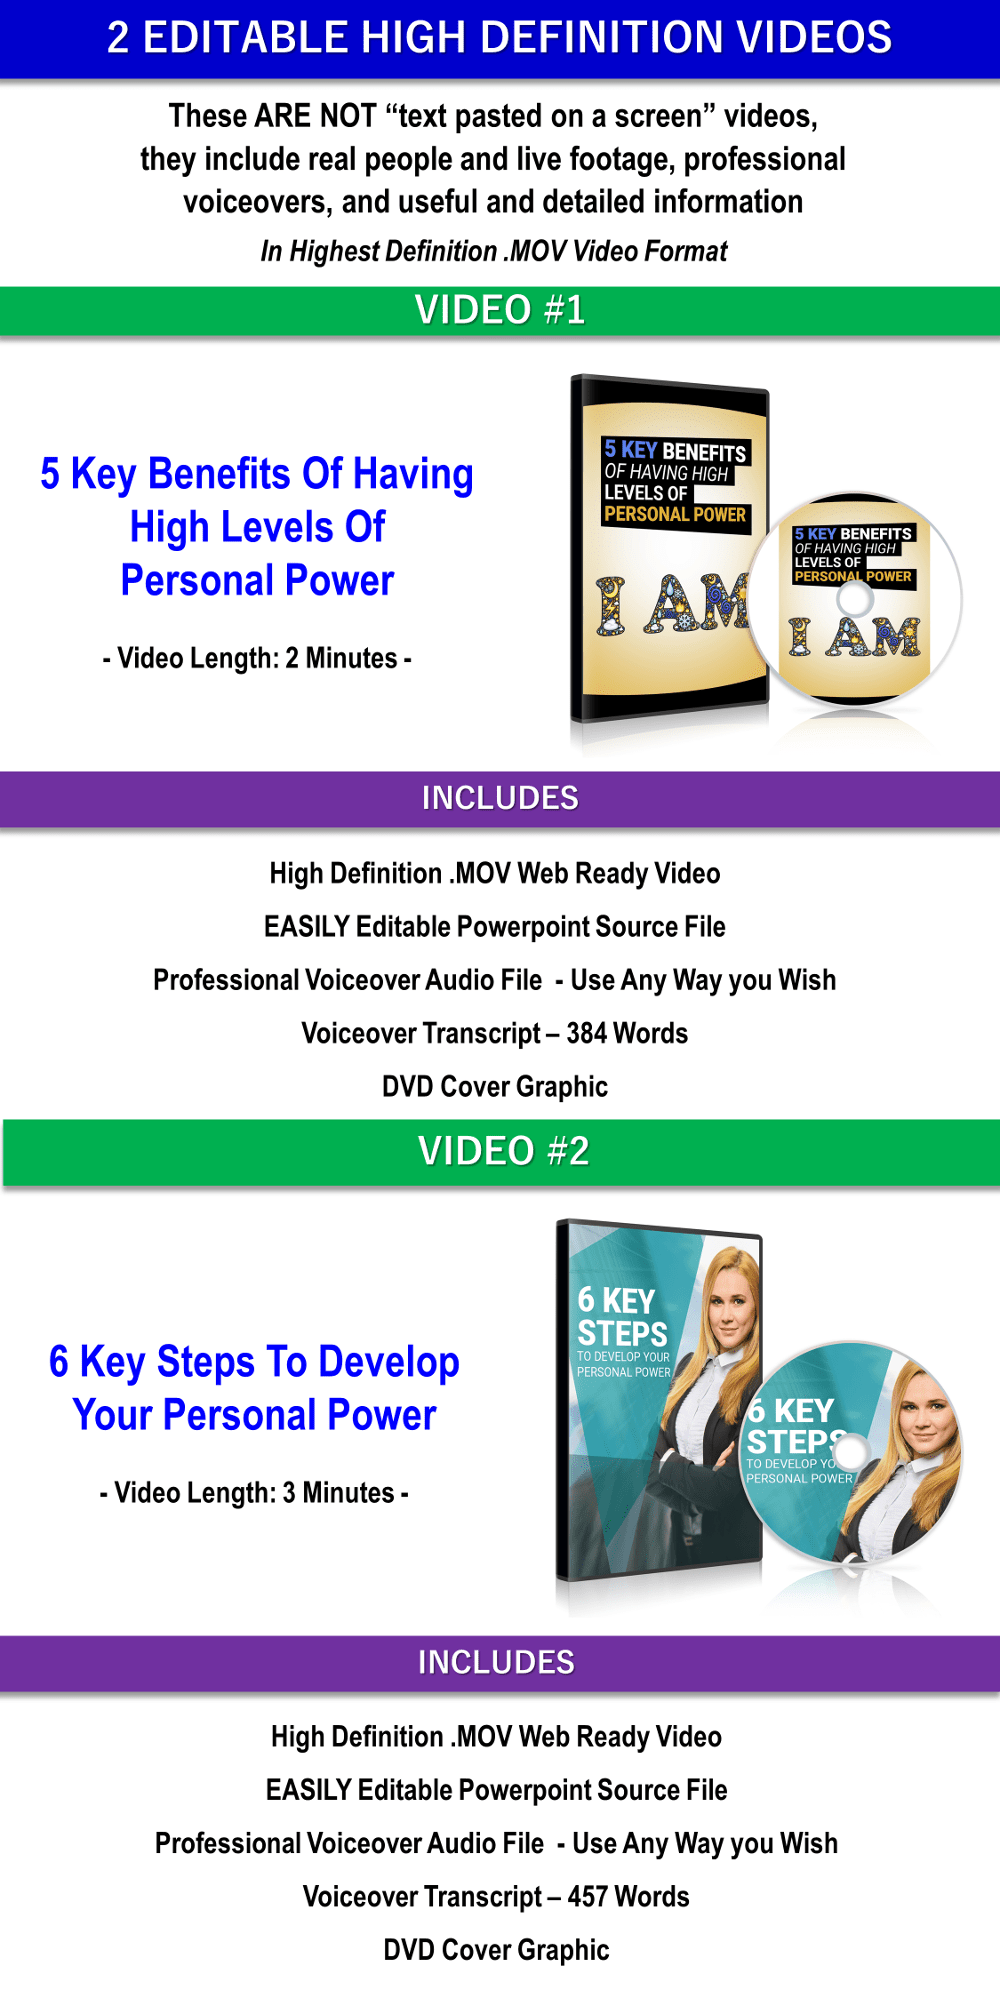 Increase your Personal Power Content With PLR Rights